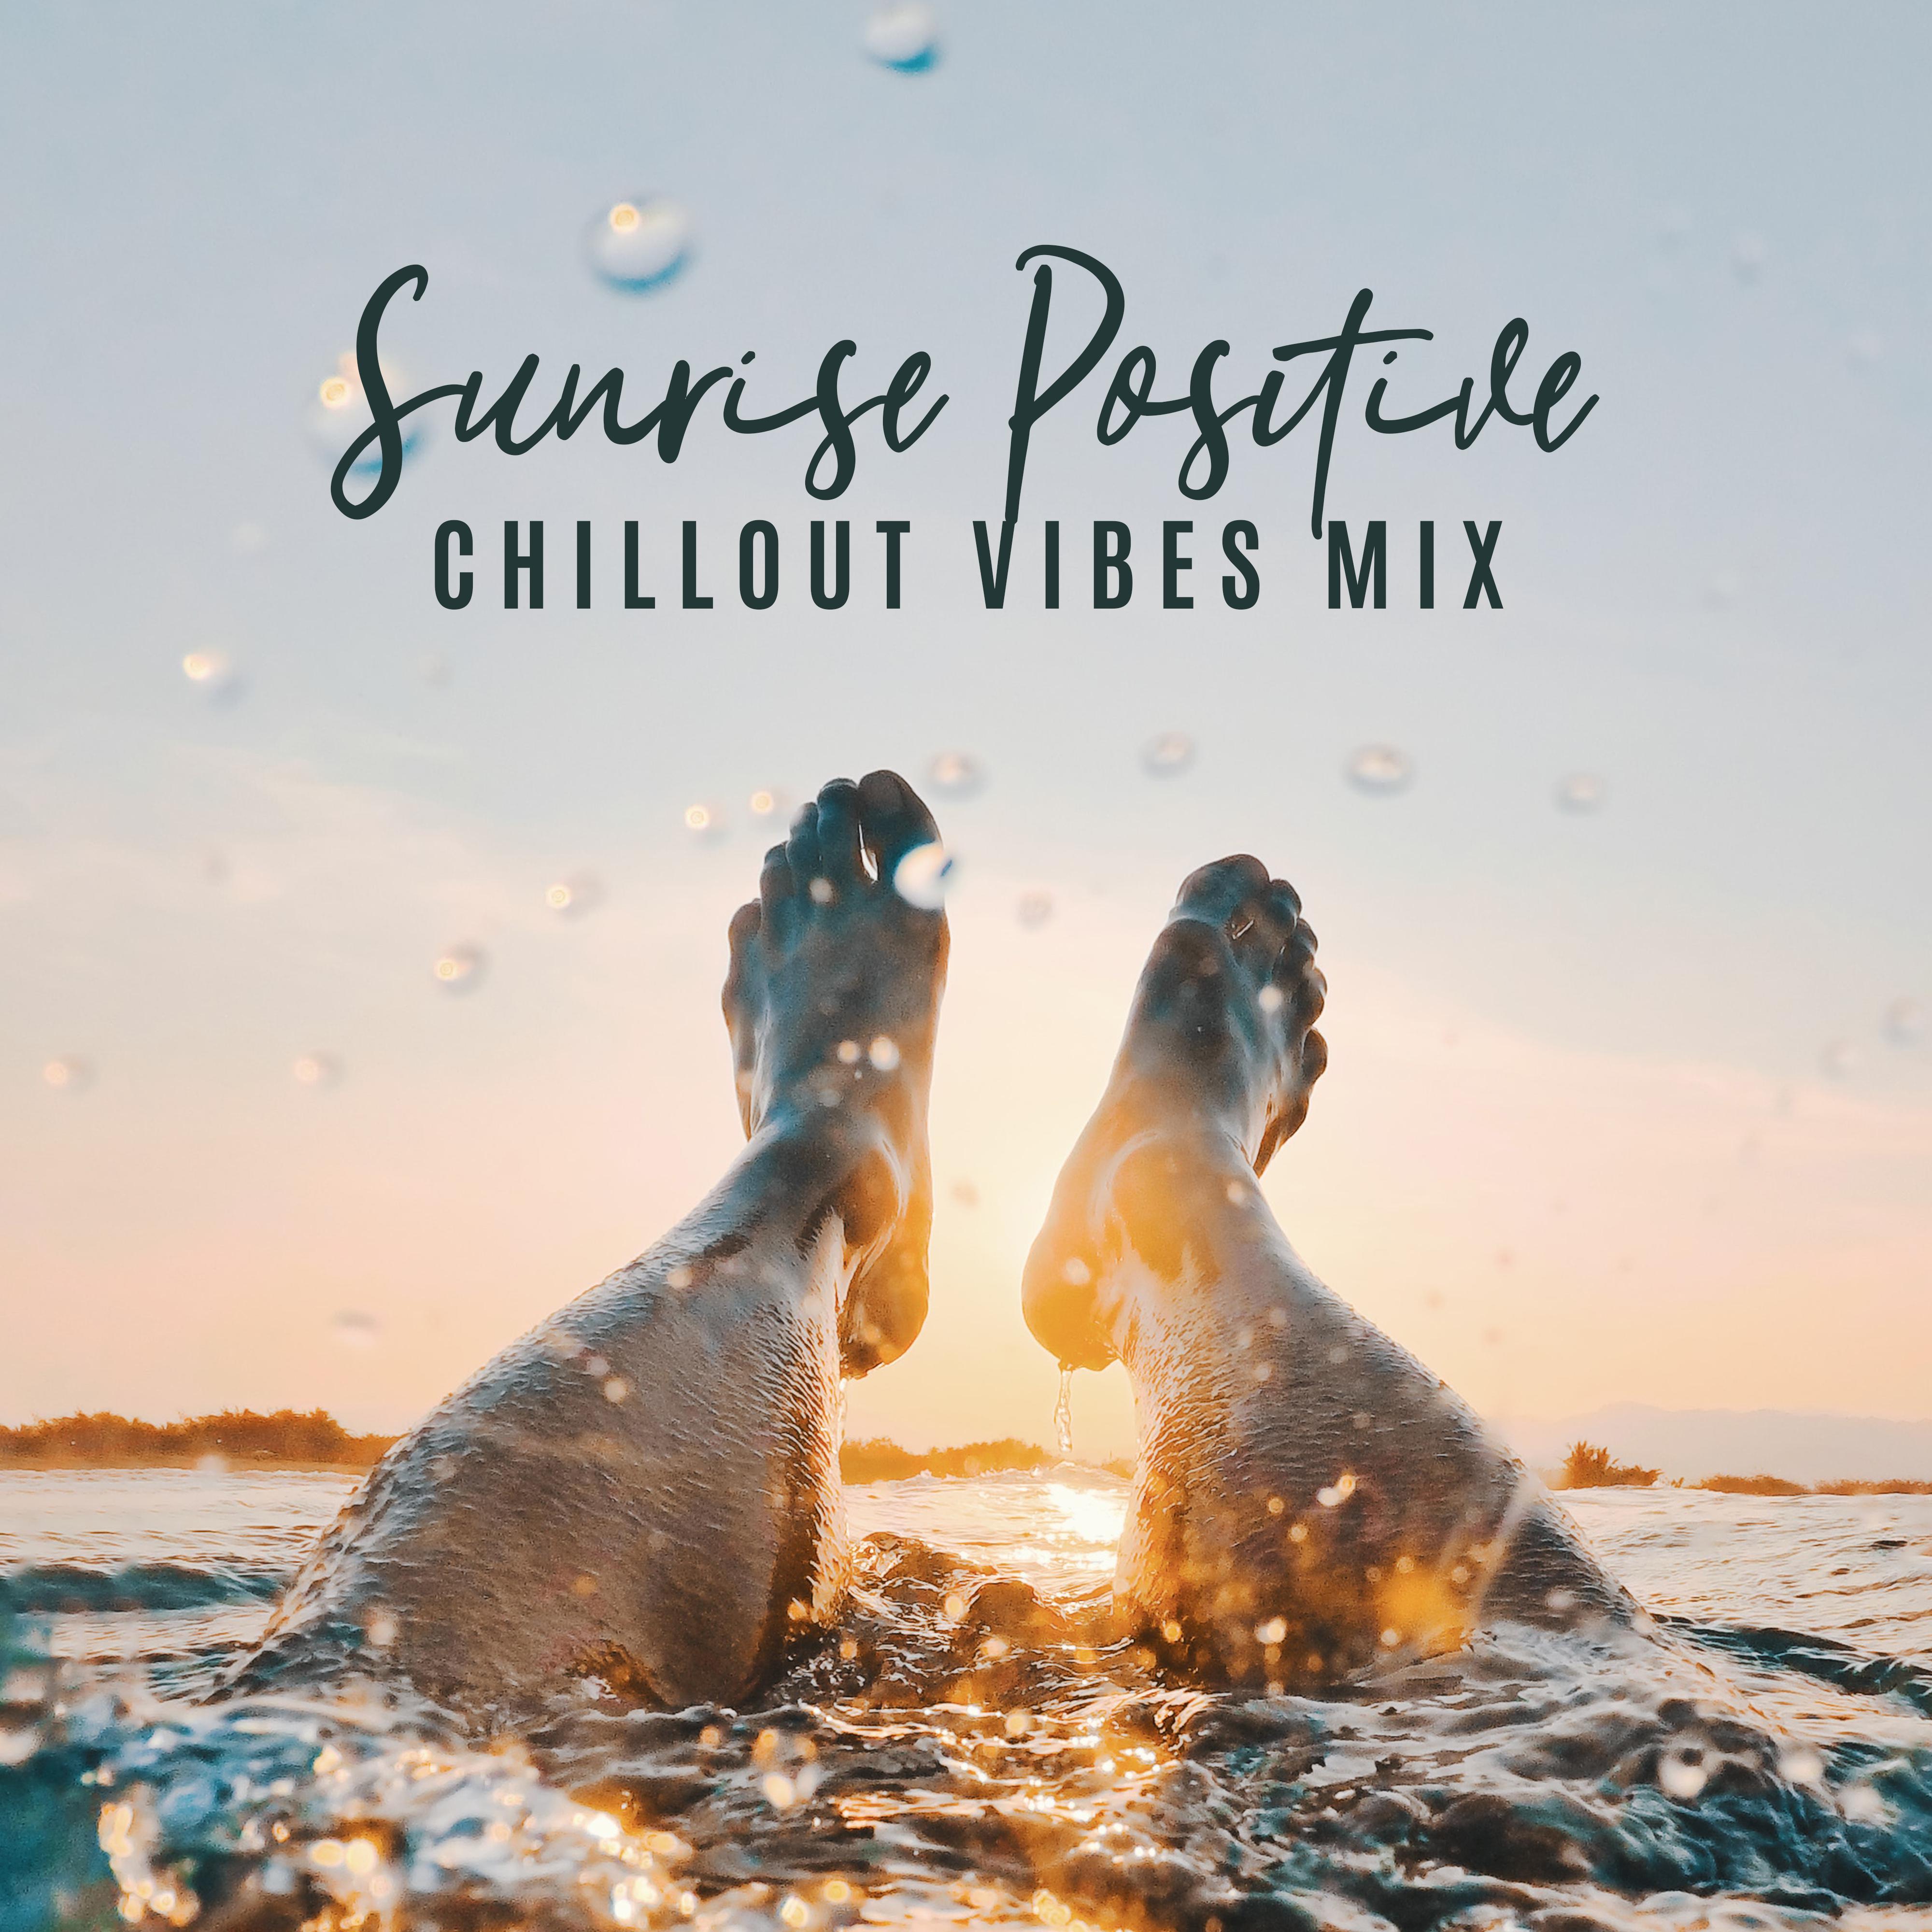 Sunrise Positive Chillout Vibes Mix: 2019 Chill Out Electronic Music Compilation, Ambient Melodies & Deep Beats for Summer Vacation Celebration, Background for Relaxing on the Tropical Beach